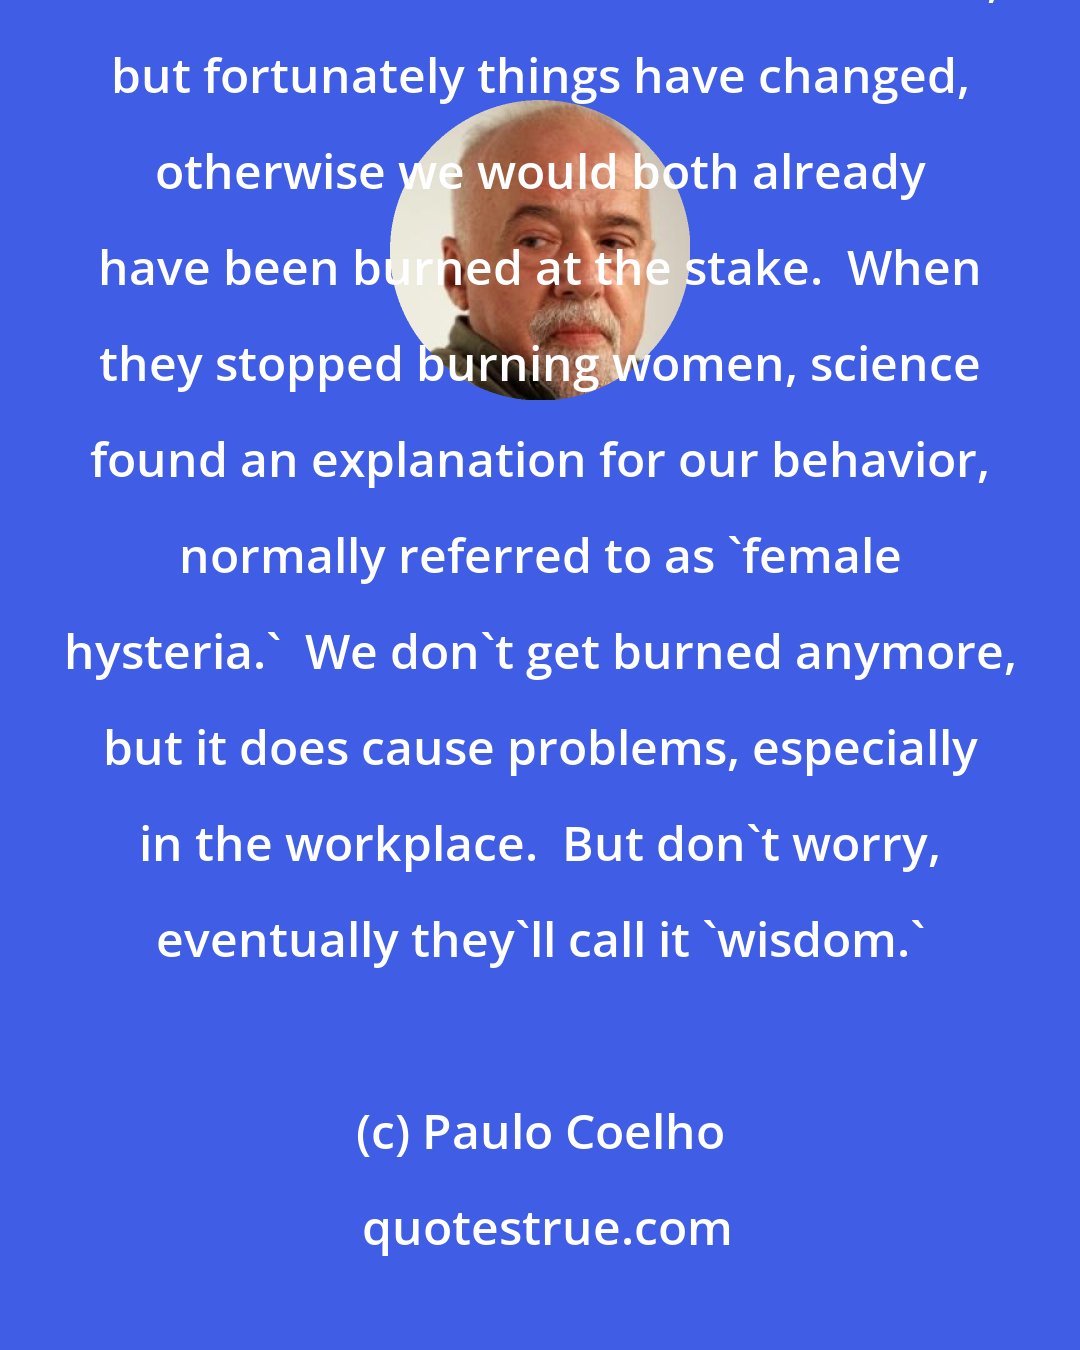 Paulo Coelho: Our imagination is larger than the world around us; we go beyond our limits.  This used to be called 'witchcraft,' but fortunately things have changed, otherwise we would both already have been burned at the stake.  When they stopped burning women, science found an explanation for our behavior, normally referred to as 'female hysteria.'  We don't get burned anymore, but it does cause problems, especially in the workplace.  But don't worry, eventually they'll call it 'wisdom.'